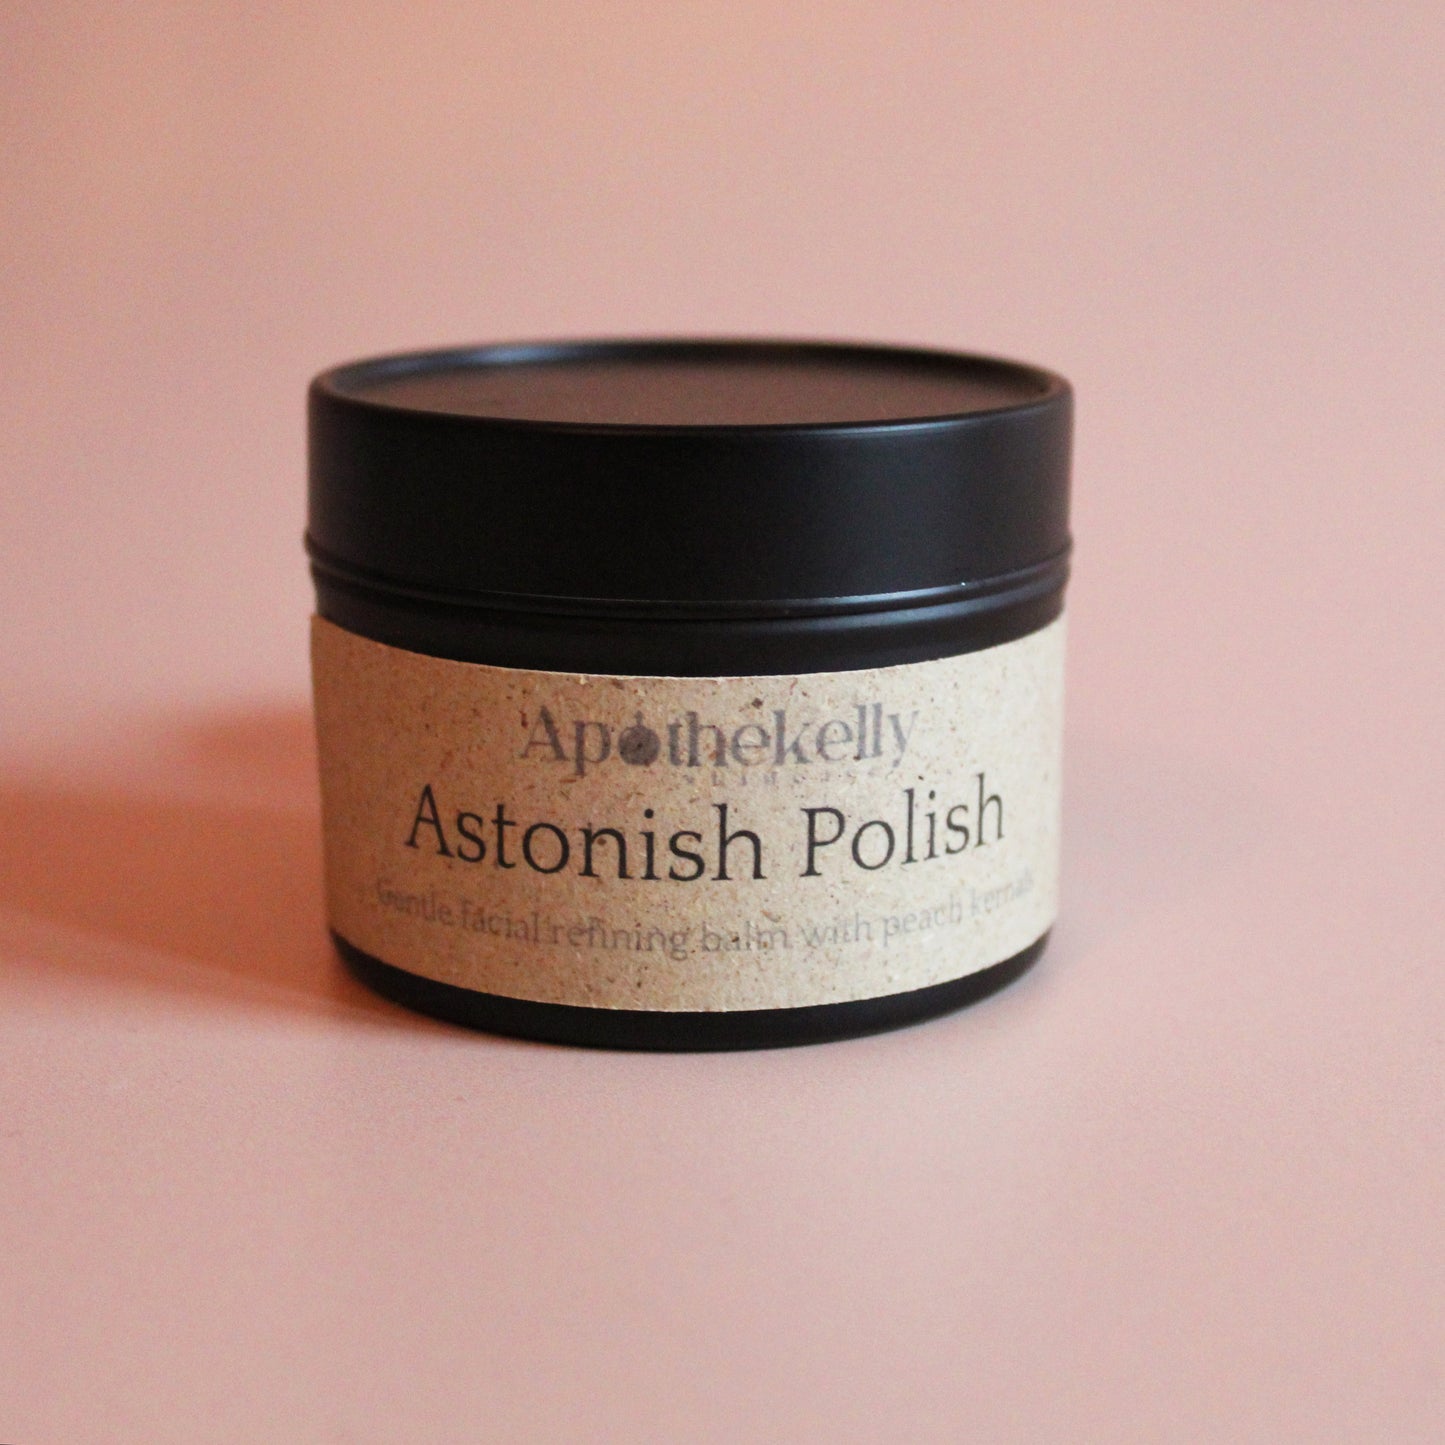 Daily Facial cleansing Balm for spot prone skin